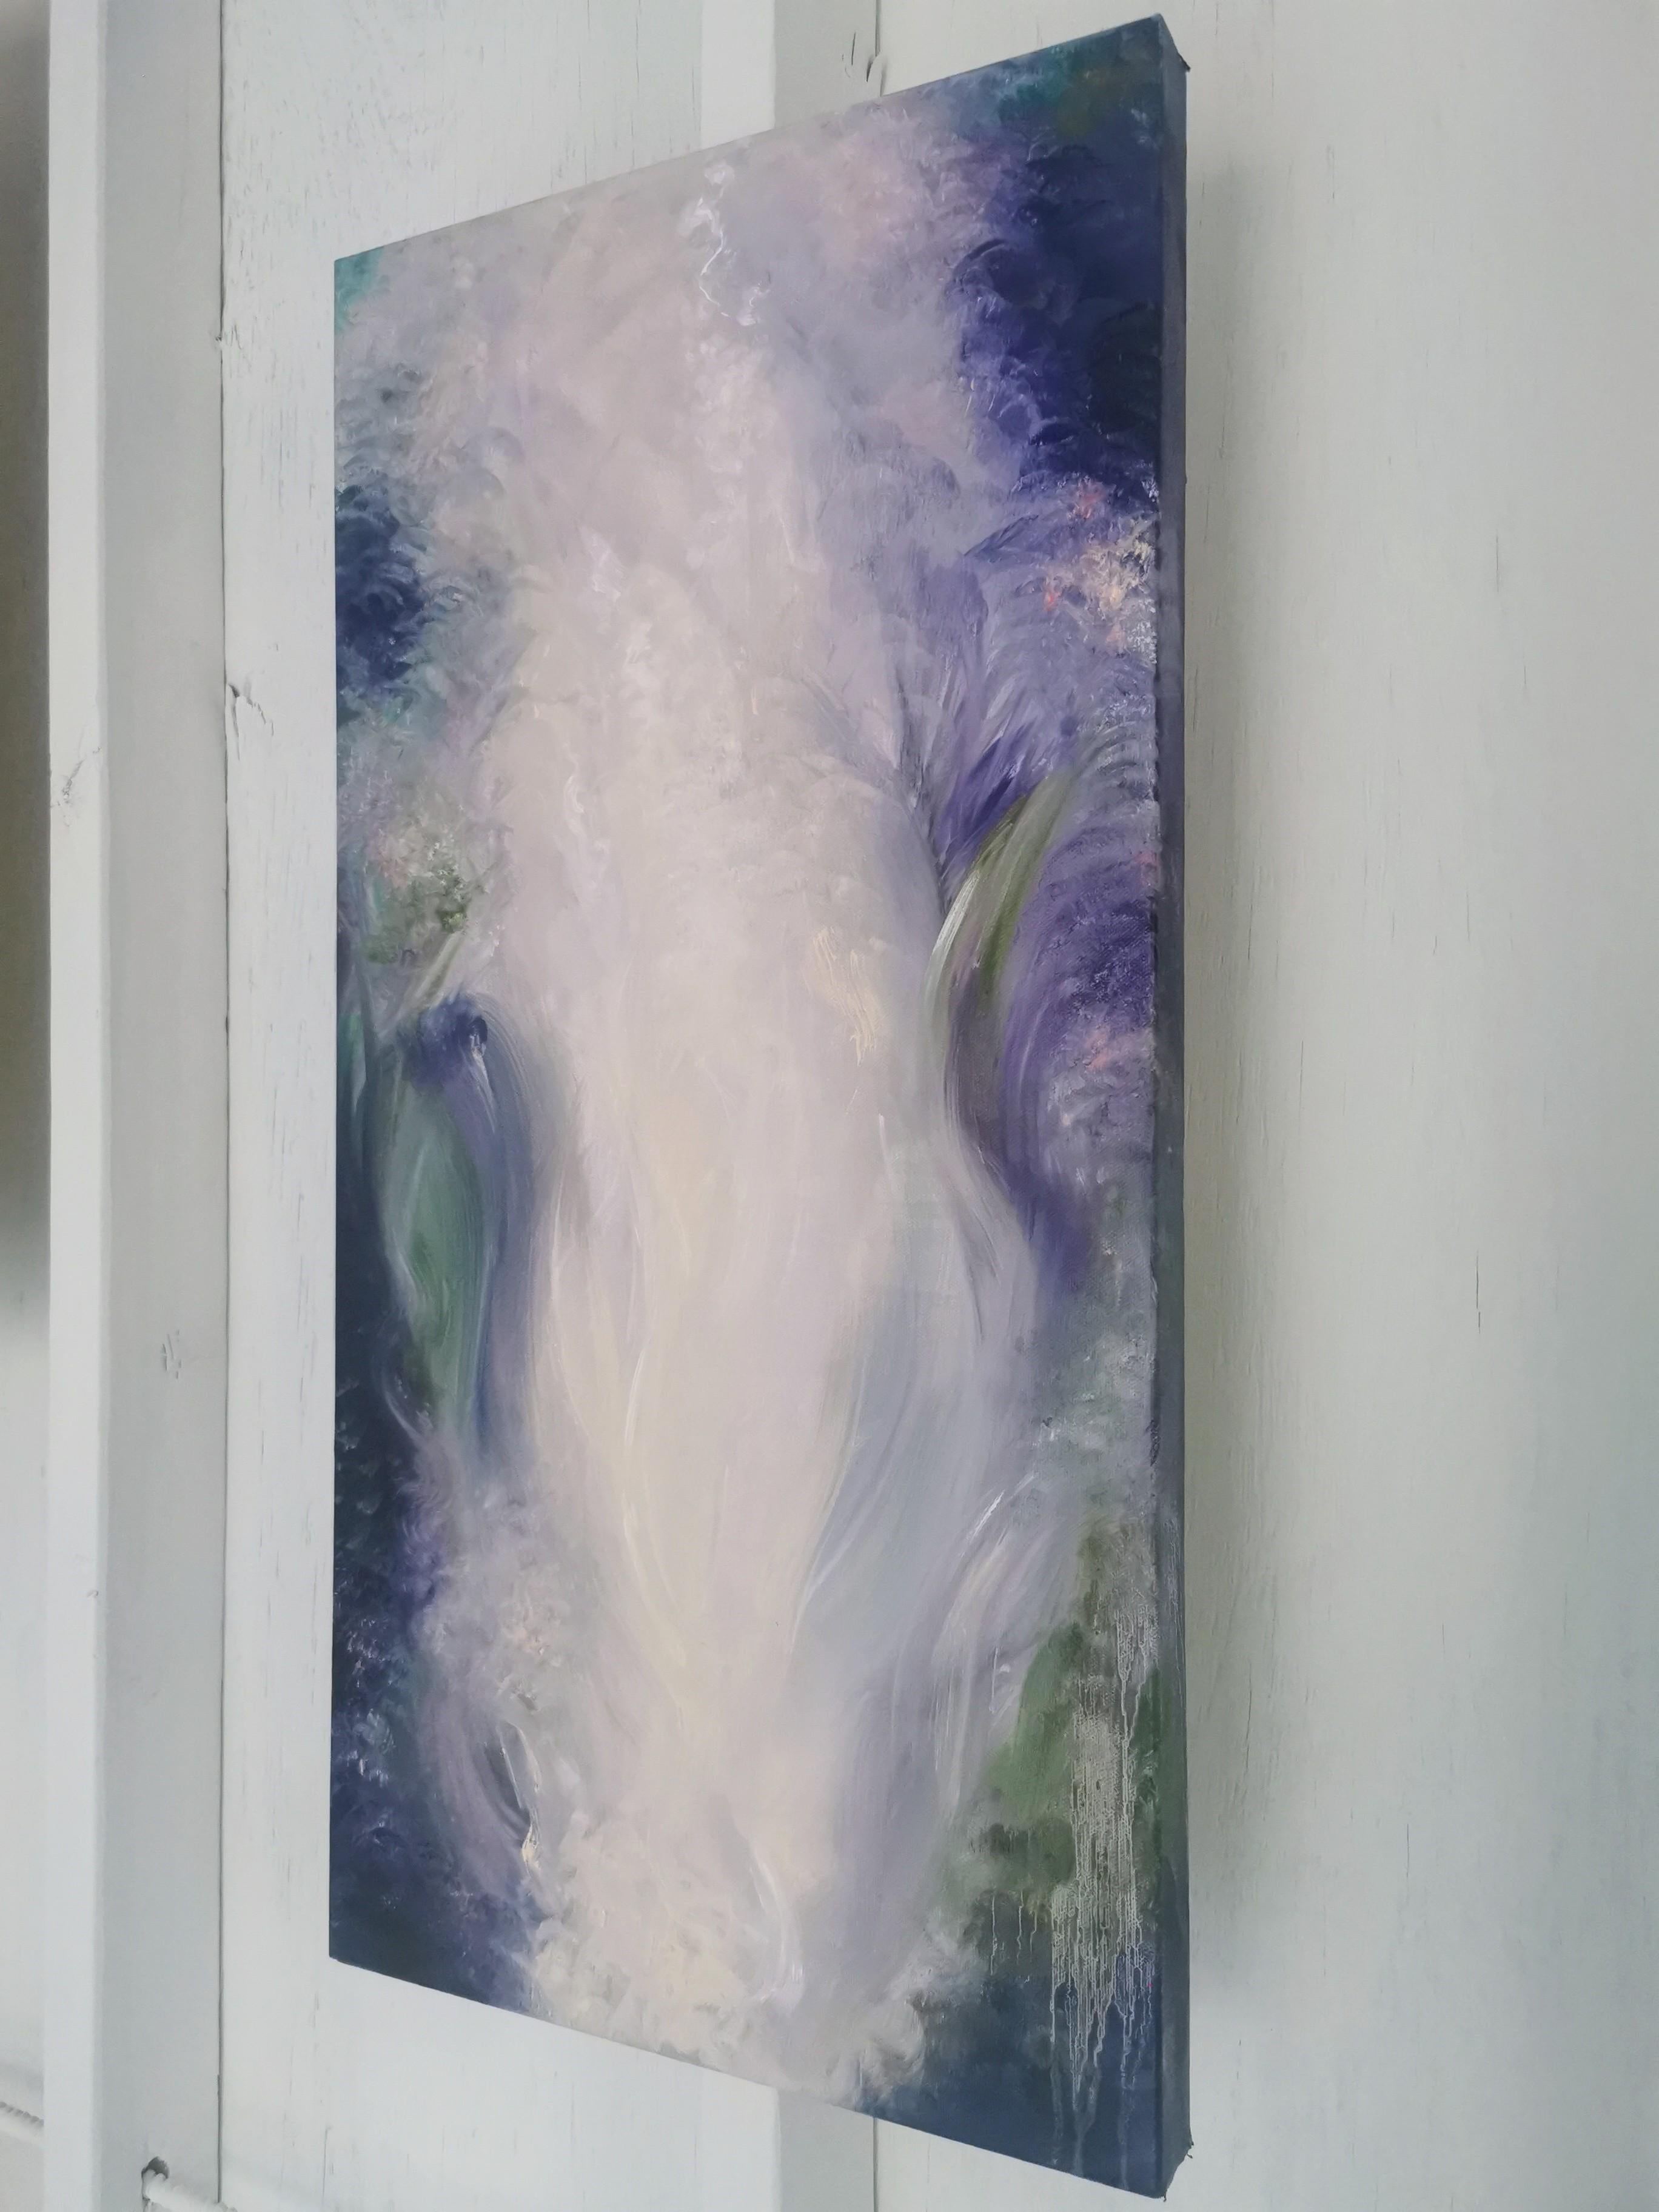 The birth of every wave - Fluid abstract nature painting For Sale 3